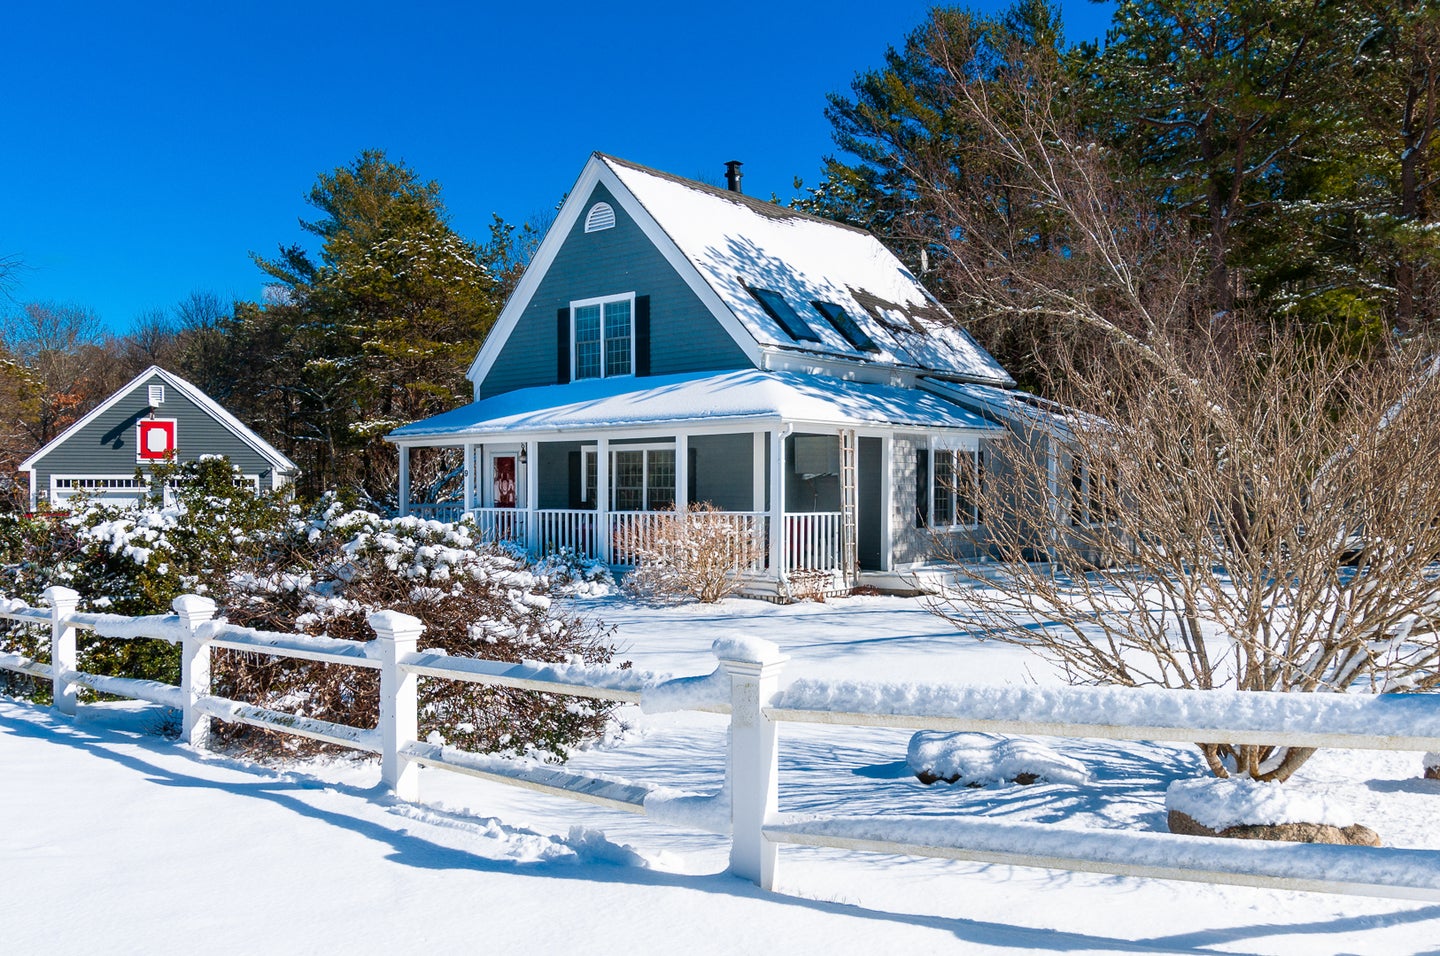 snowy exterior of blue home